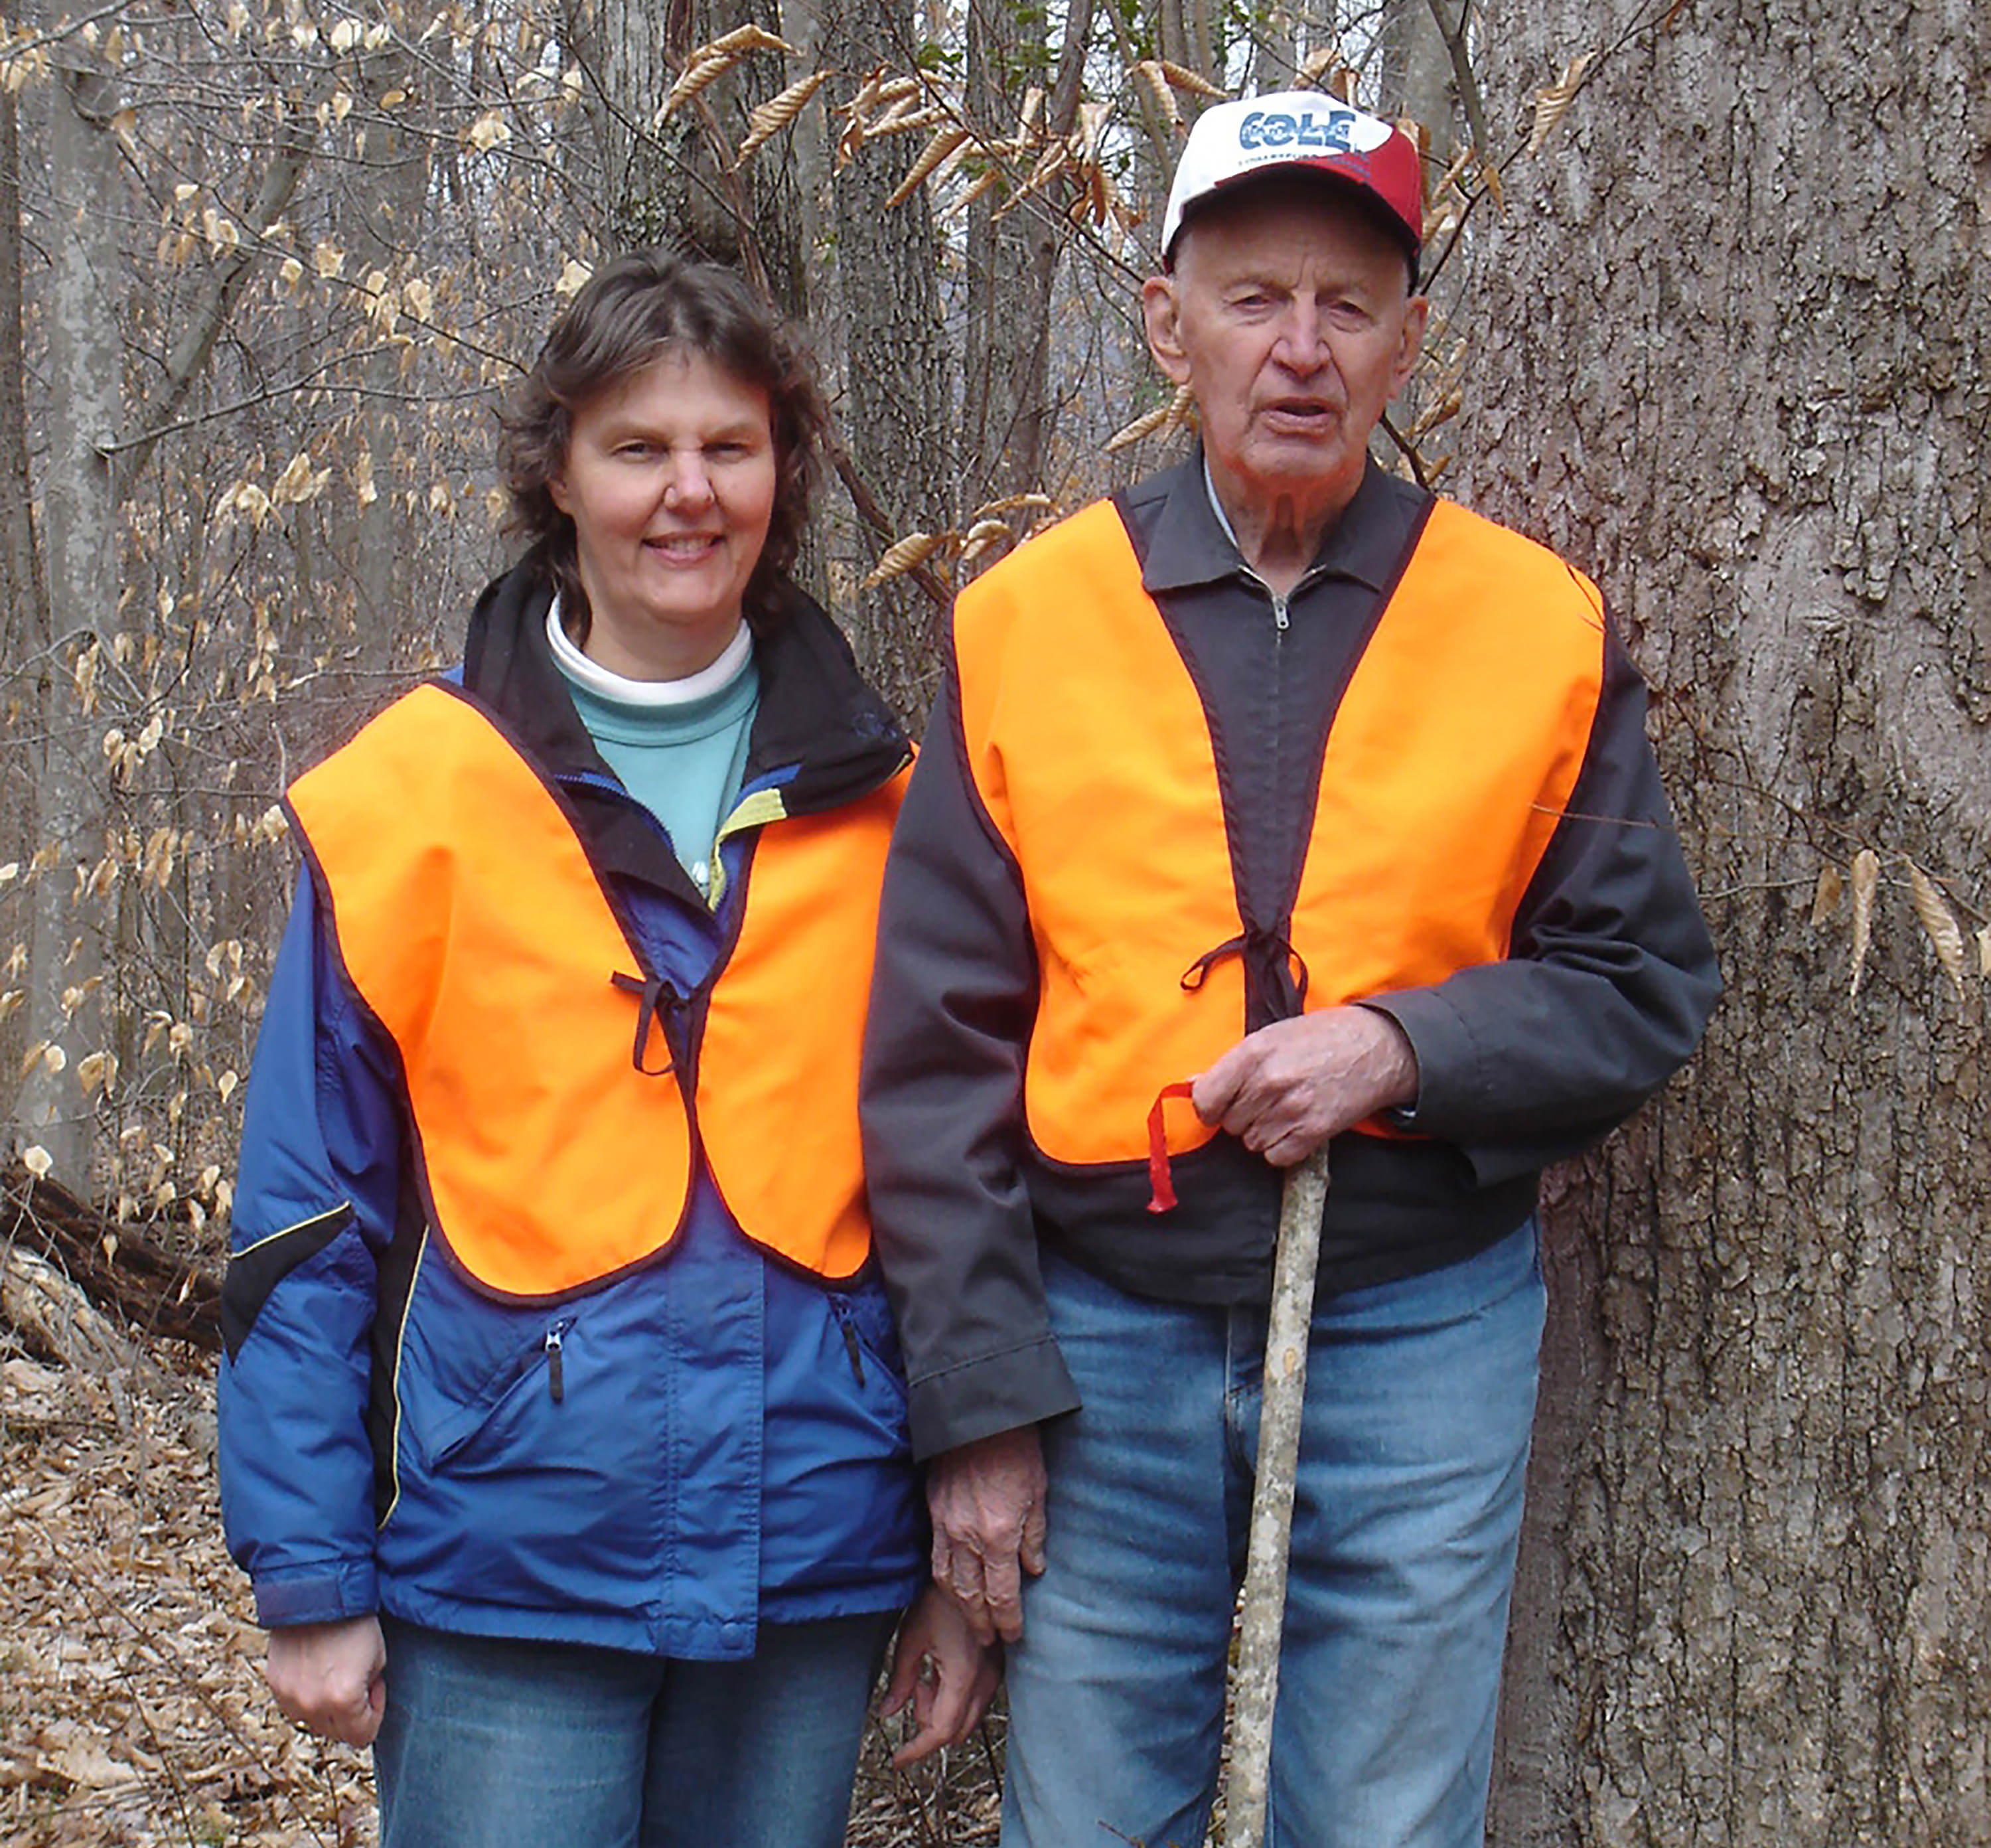 Two people wearing orange vests stand in a forest.